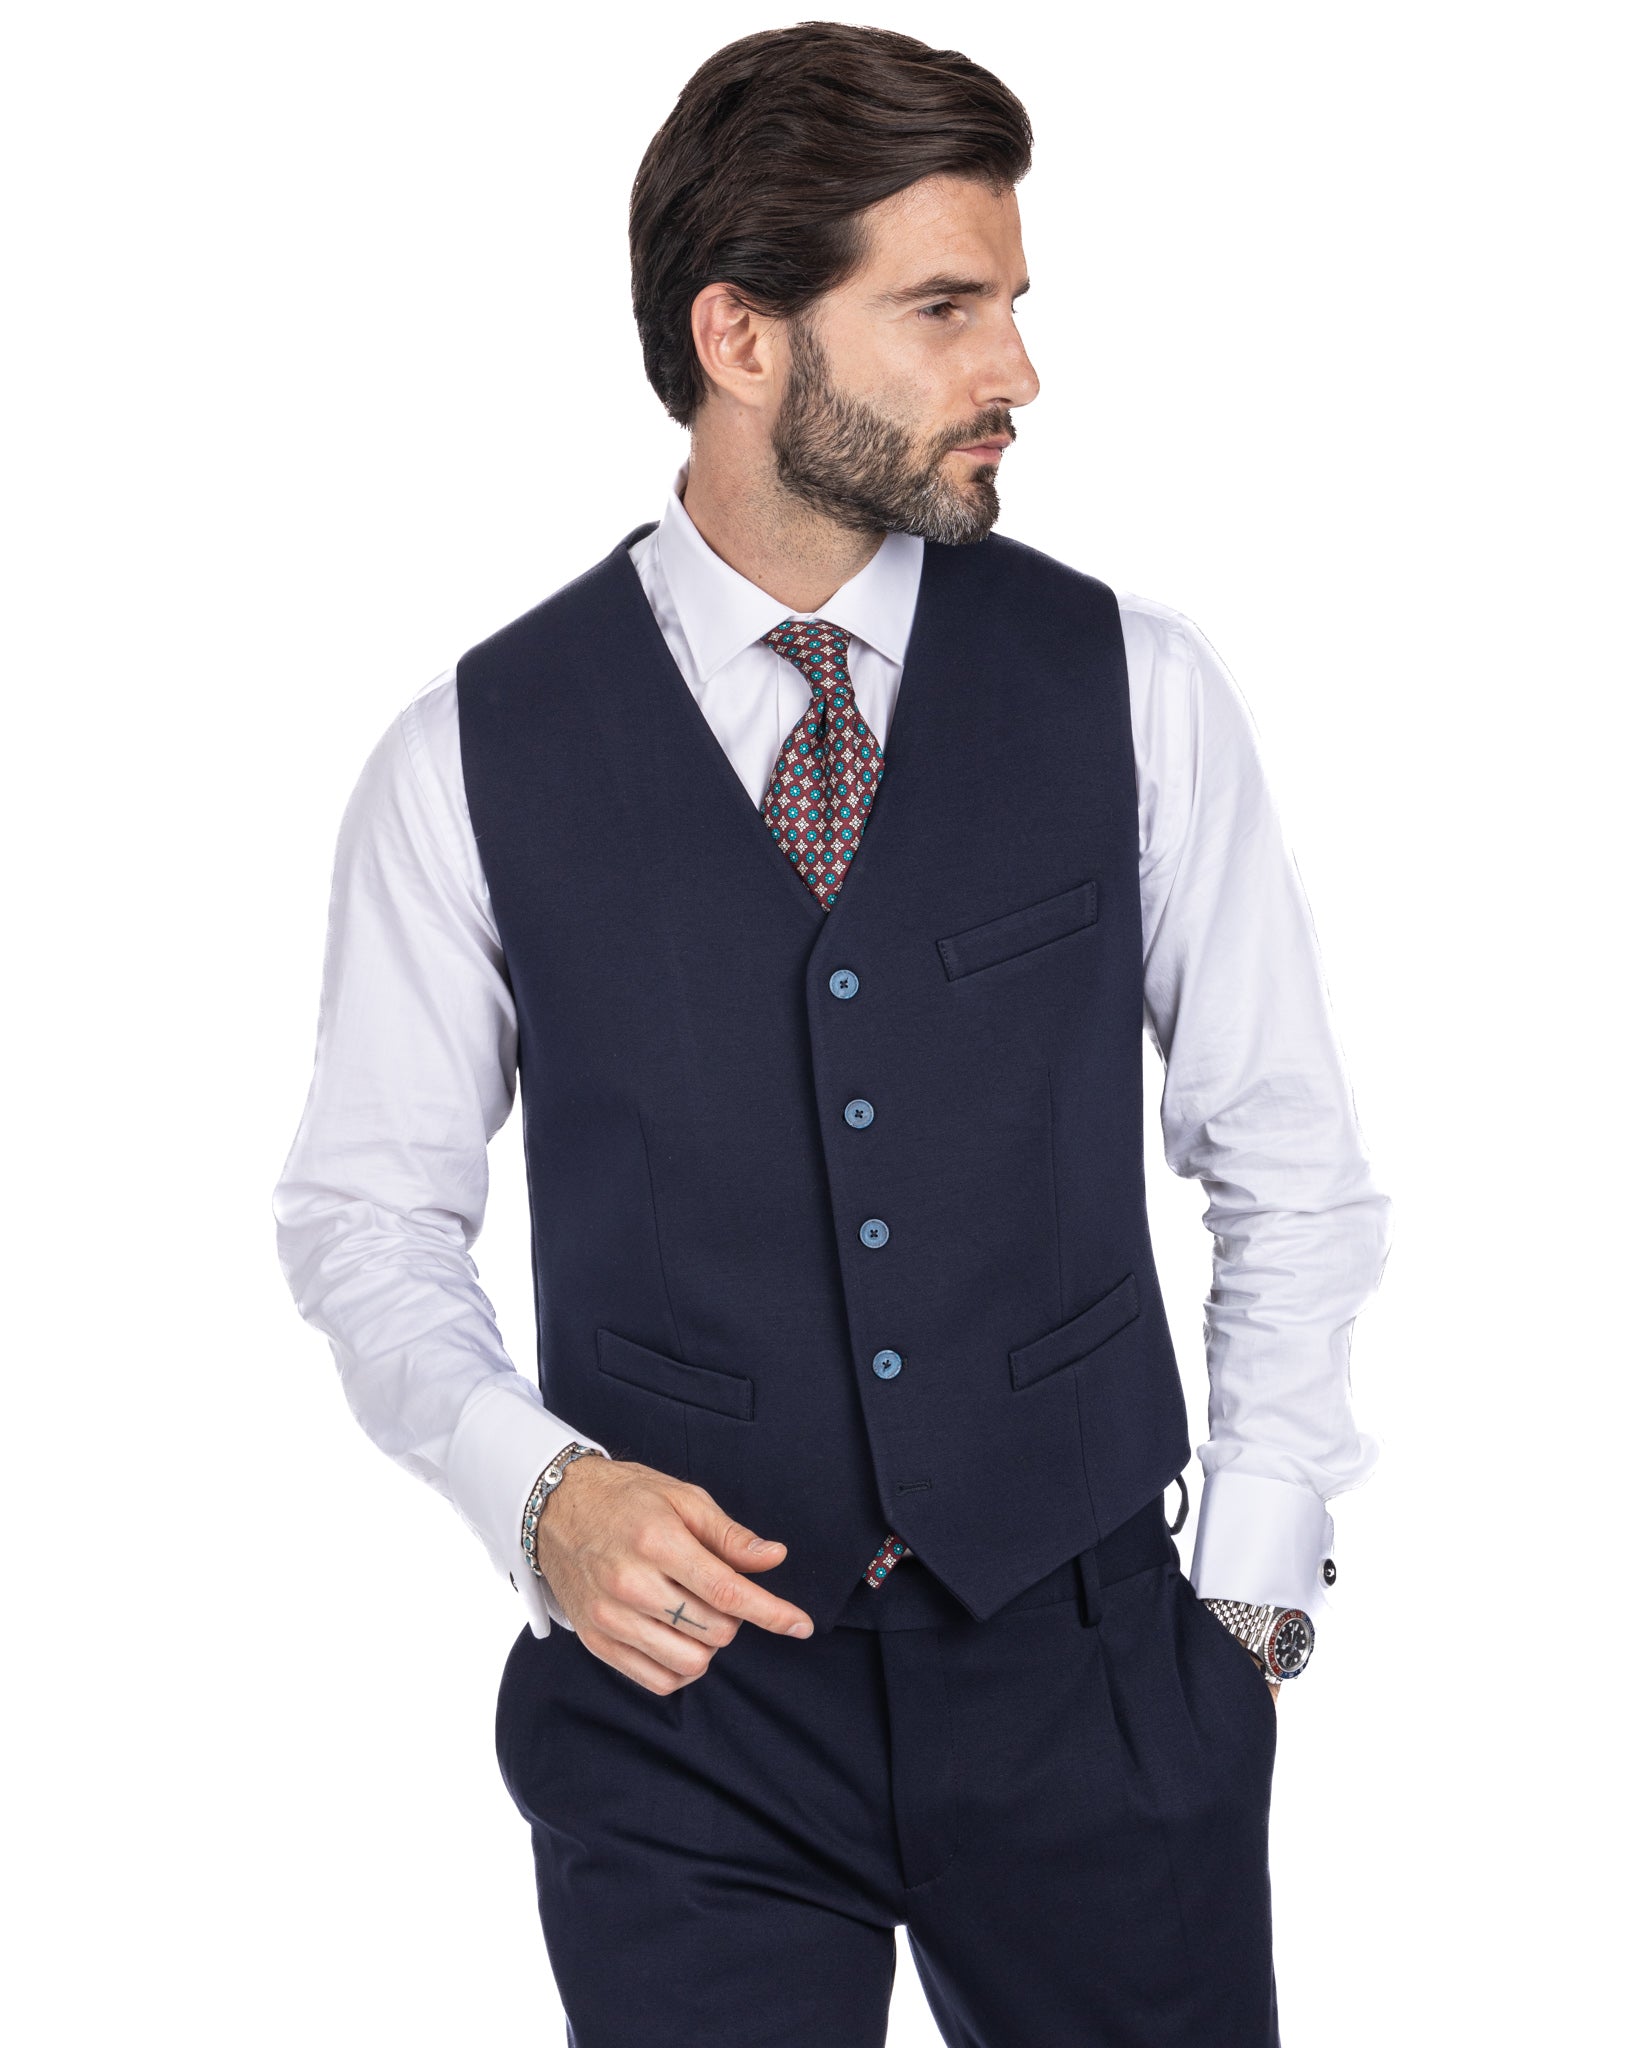 Mustang - single-breasted waistcoat in blue Milan stitch